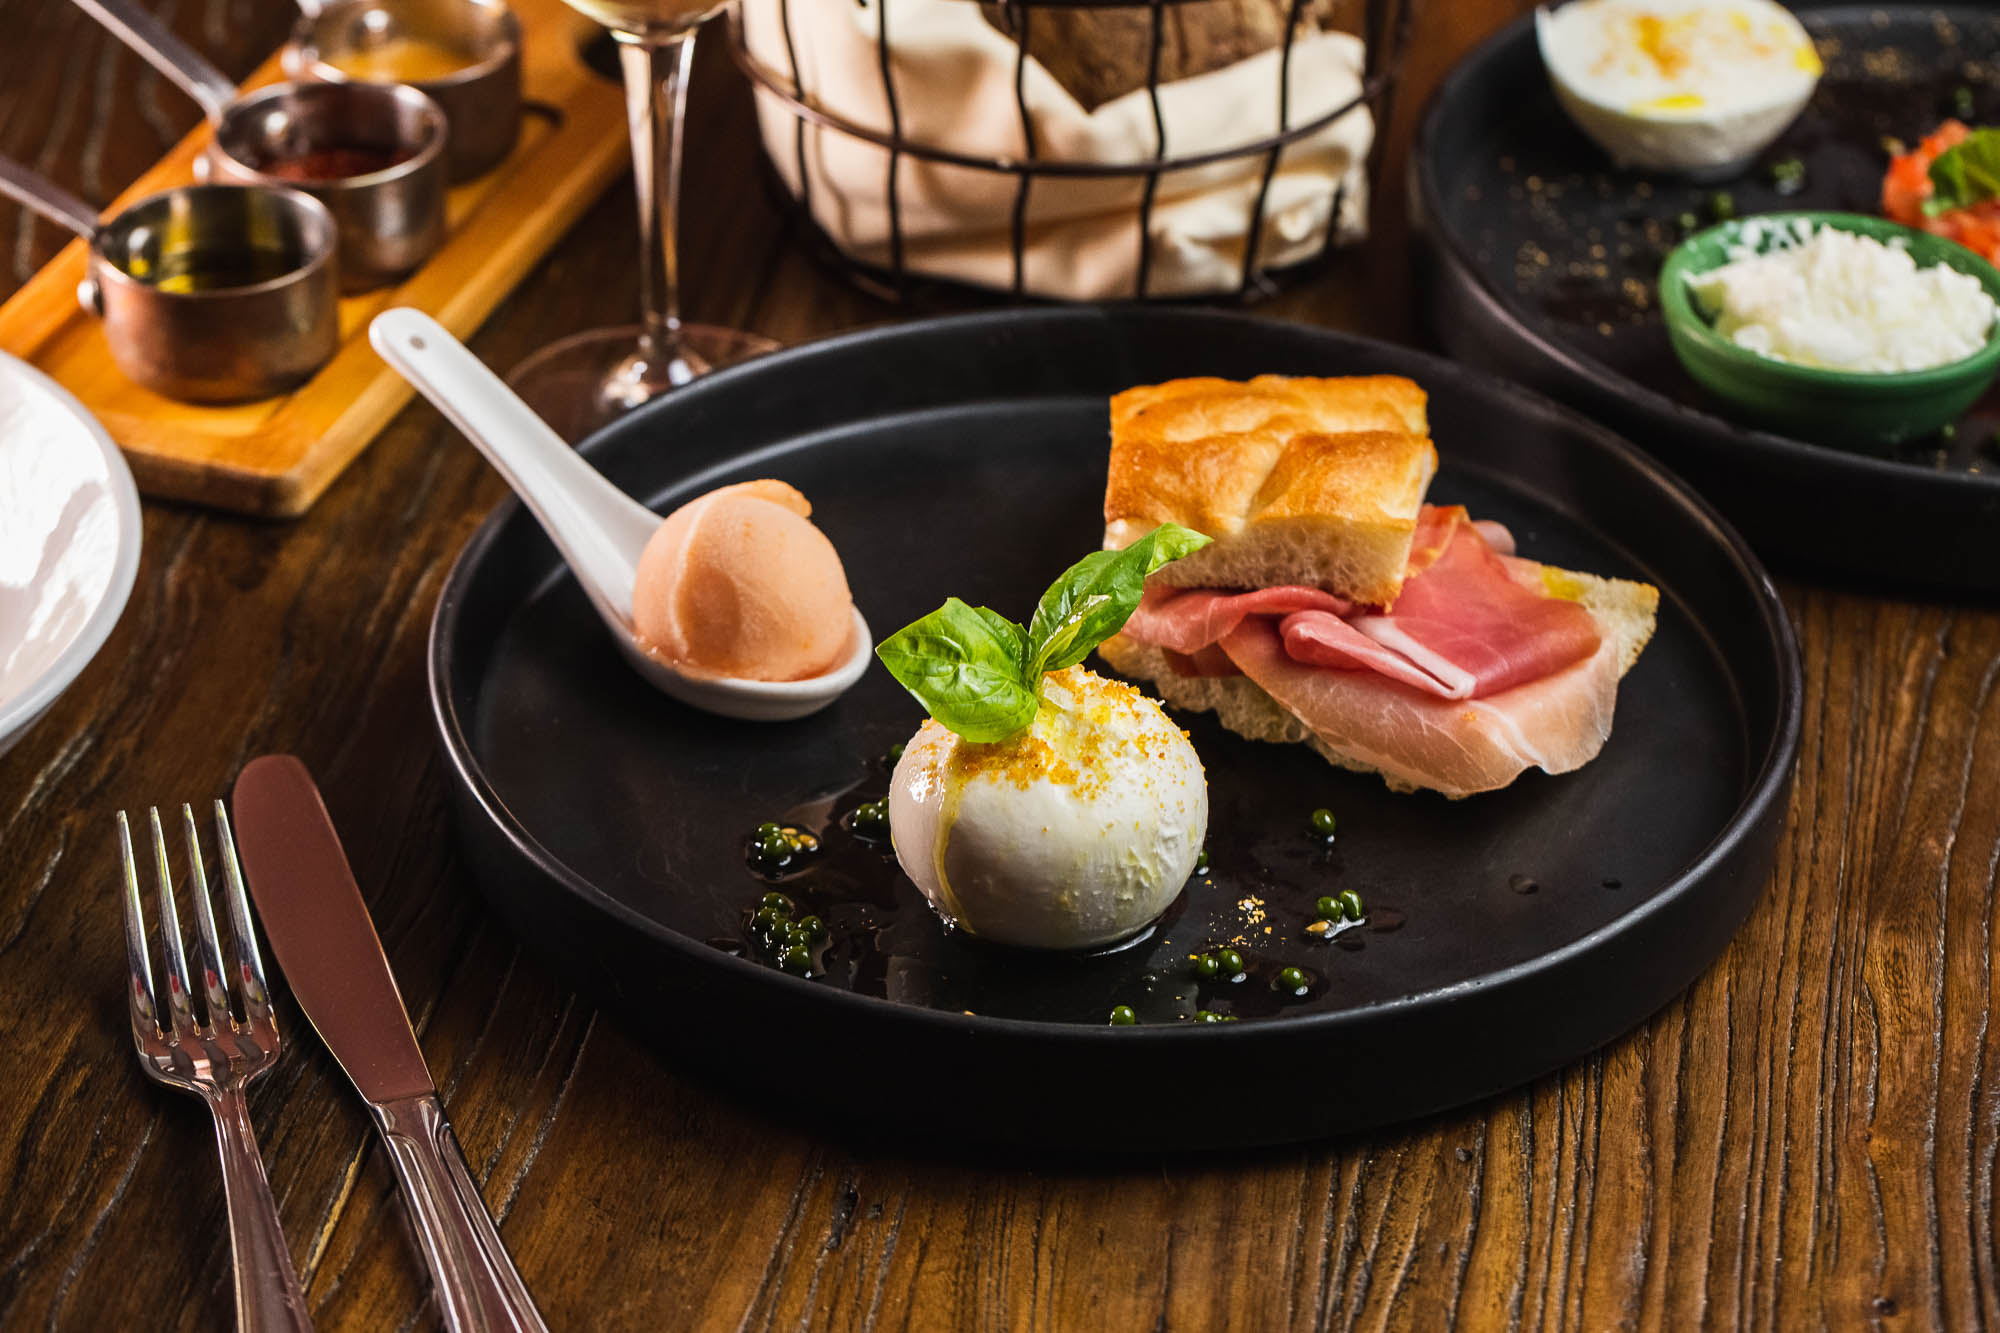 Burrata served with prosciutto, bread, and  sorbet on a spoon